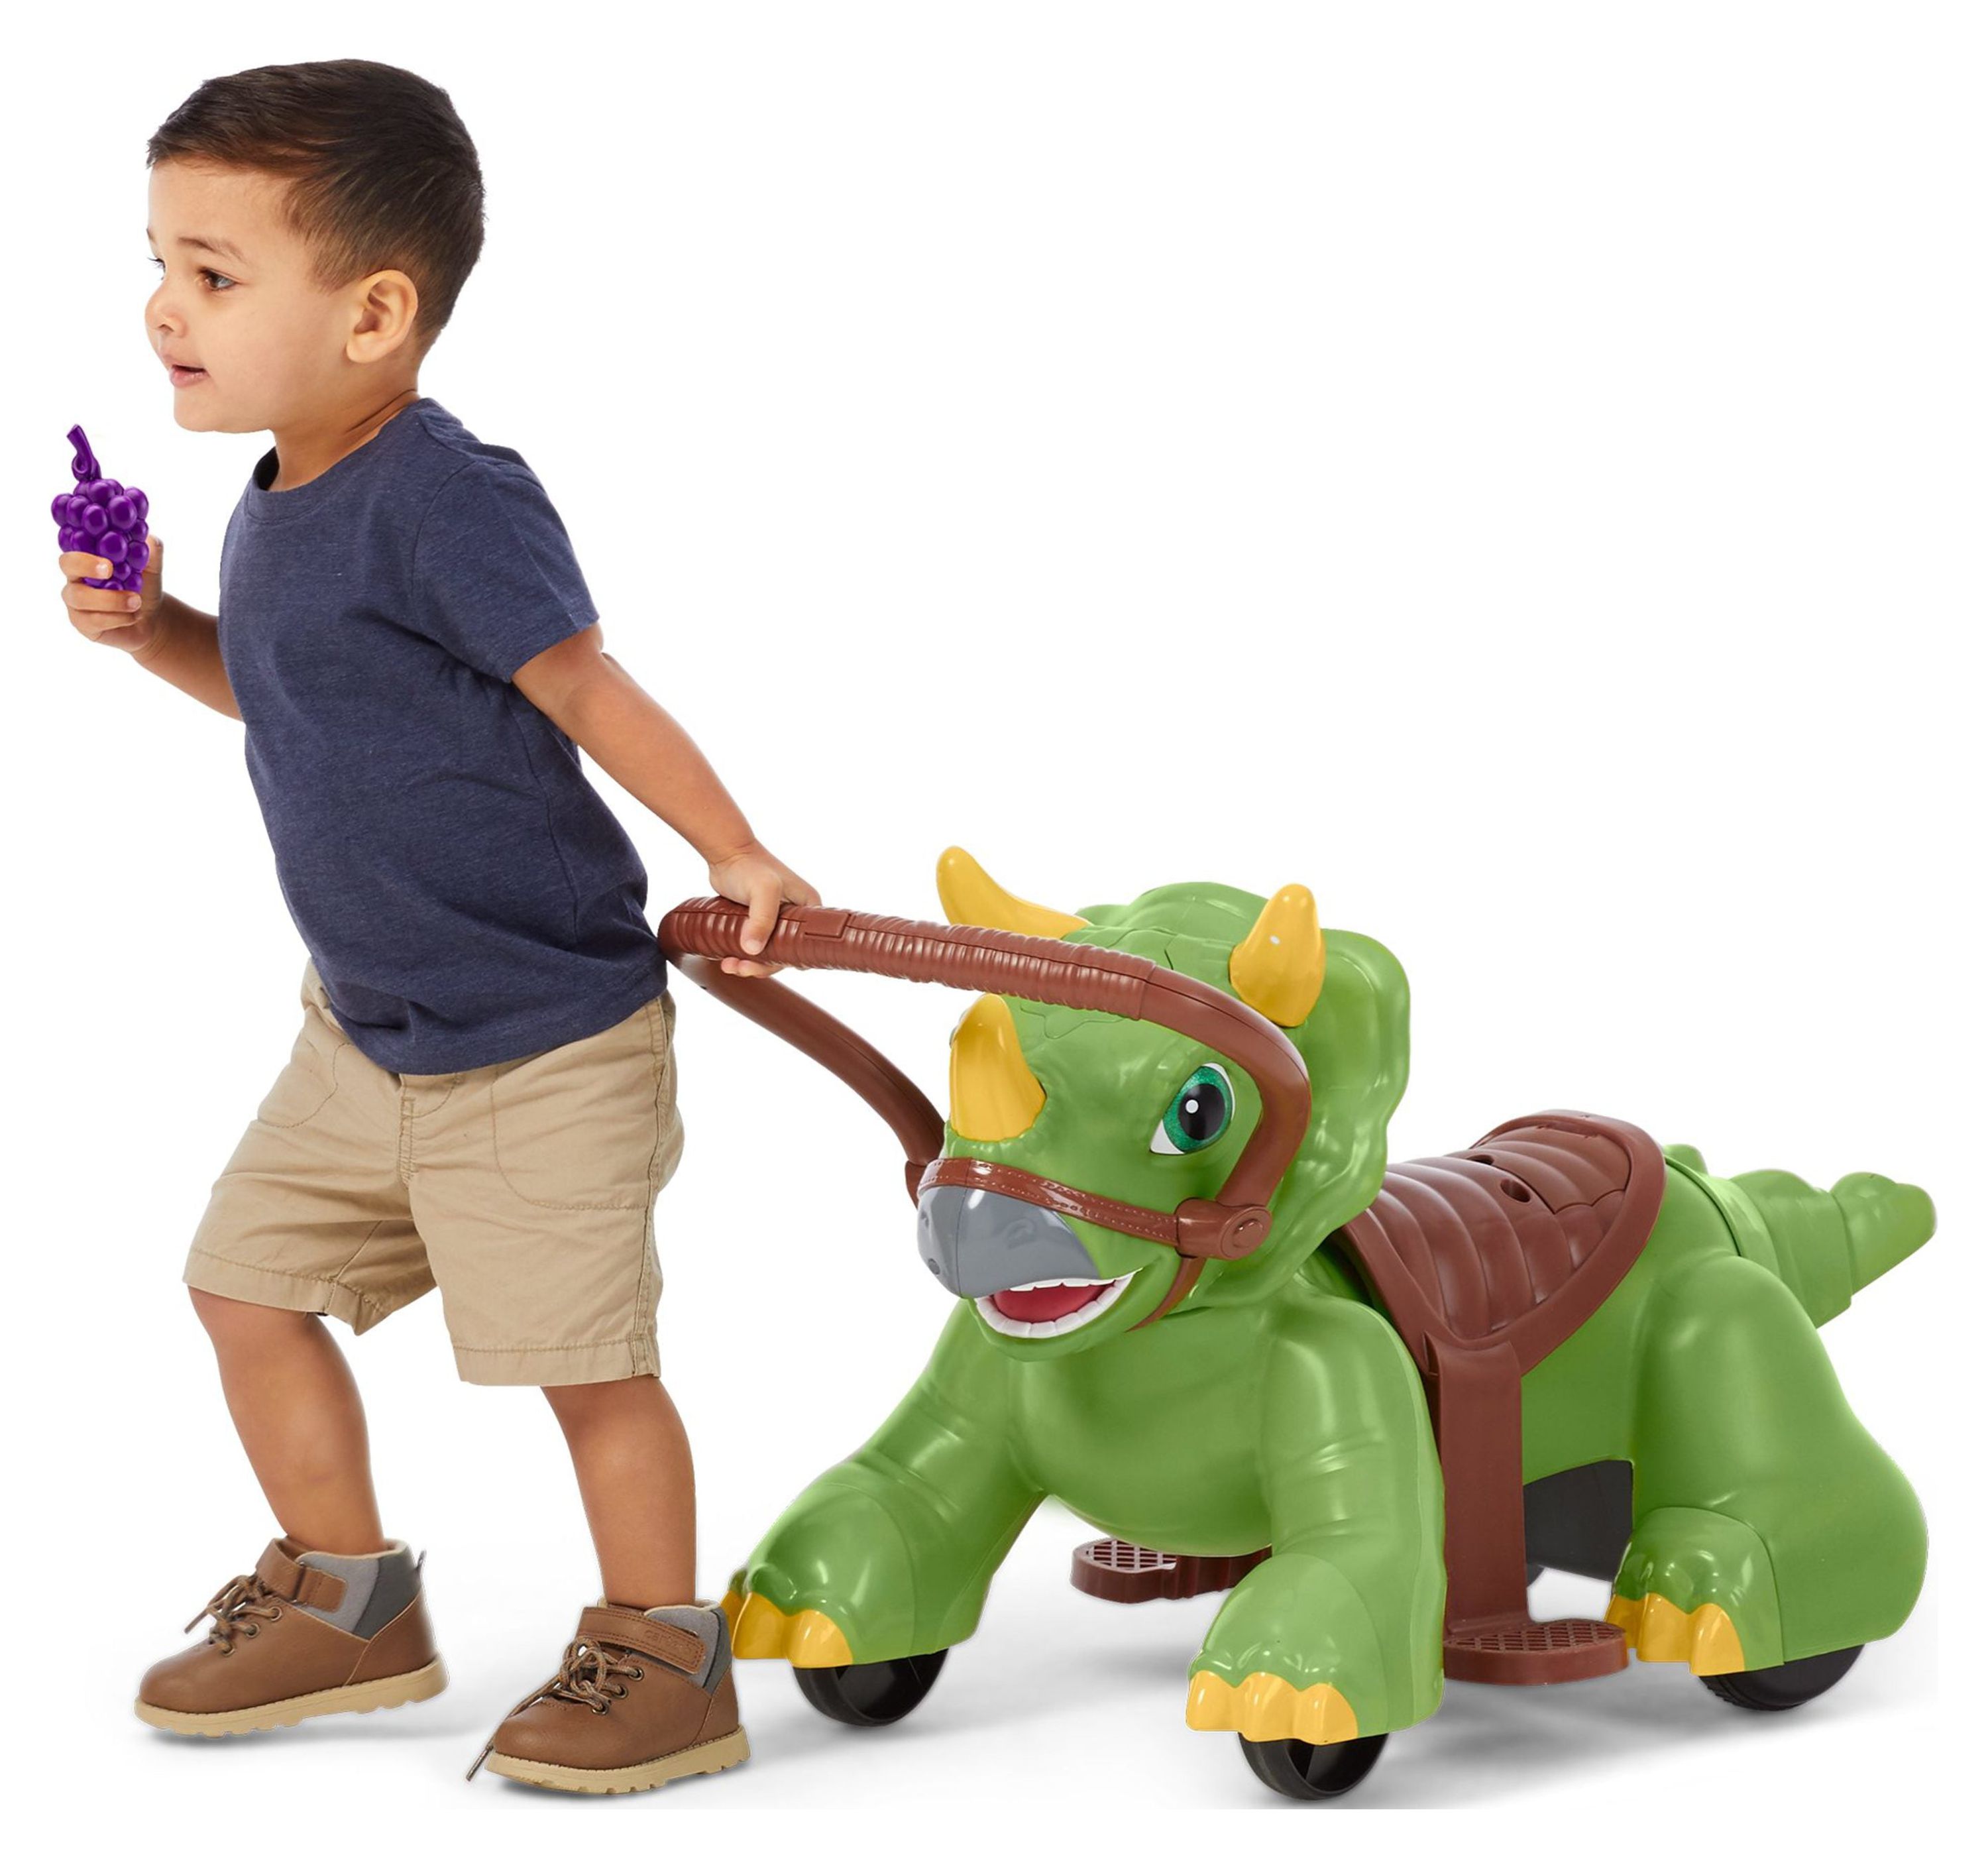 Rideamals Dinosaur Ride-On Toy by Kid Trax, powered rechargeable toddler, boys or girls, toddler - image 4 of 10